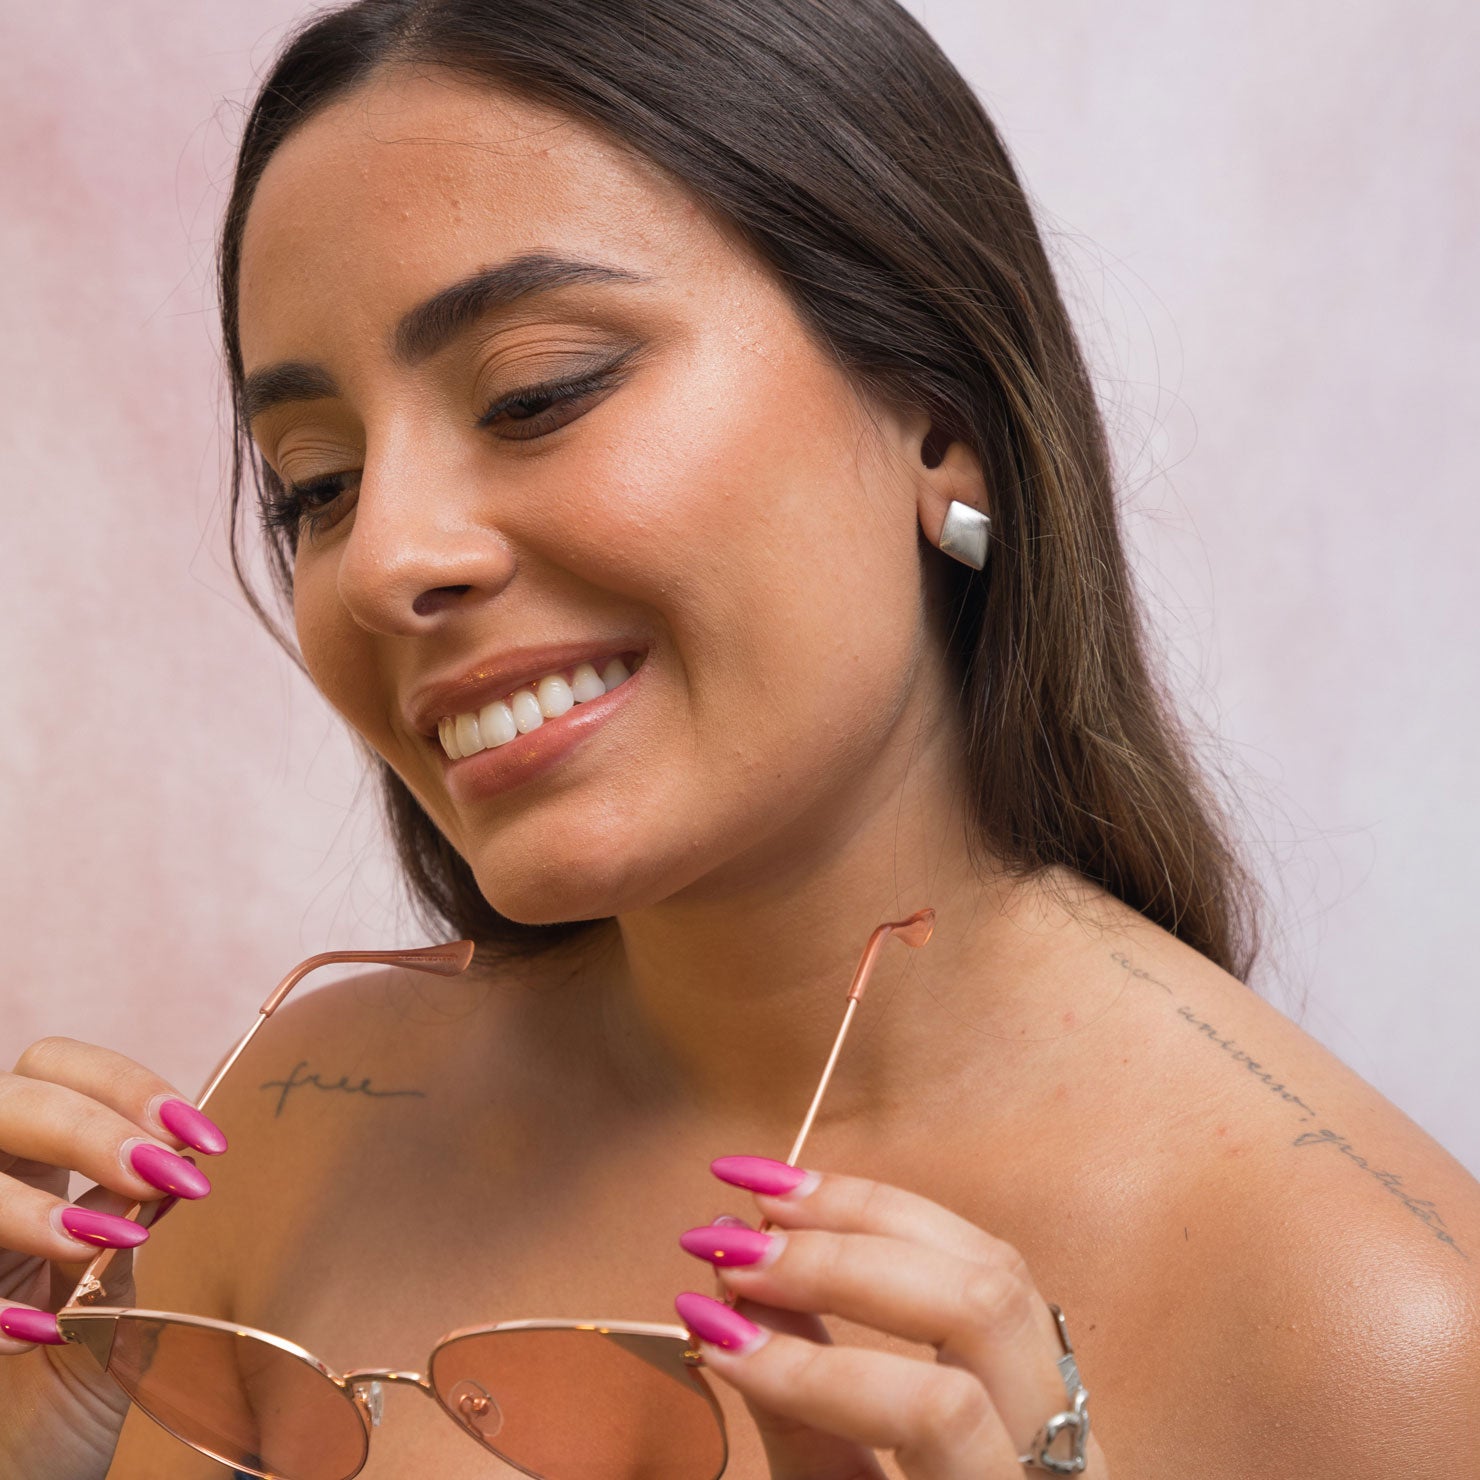 A model wearing the Negroni Clip On Earrings feature a Mosquito Coil Clip-On design, making them suitable for all ear types. Keep them on for up to 24 hours without discomfort, thanks to medium-strength secure hold and adjustable padding. Crafted from a Silver Toned Copper Alloy, each purchase contains one pair.